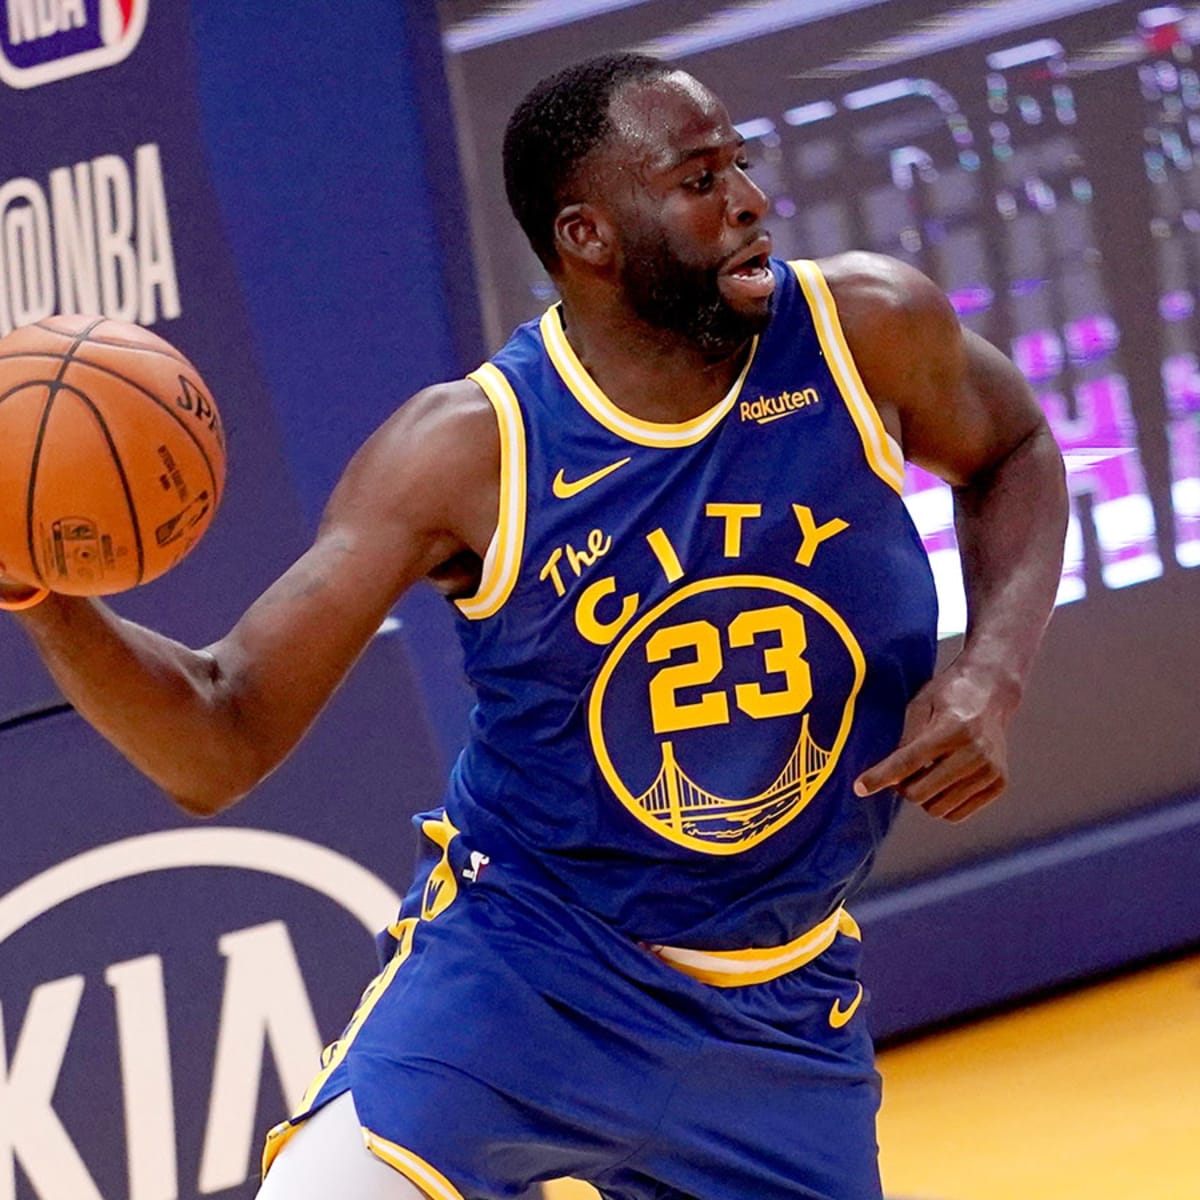 Draymond Green To Analyze NBA Games for Turner While He Keeps Playing